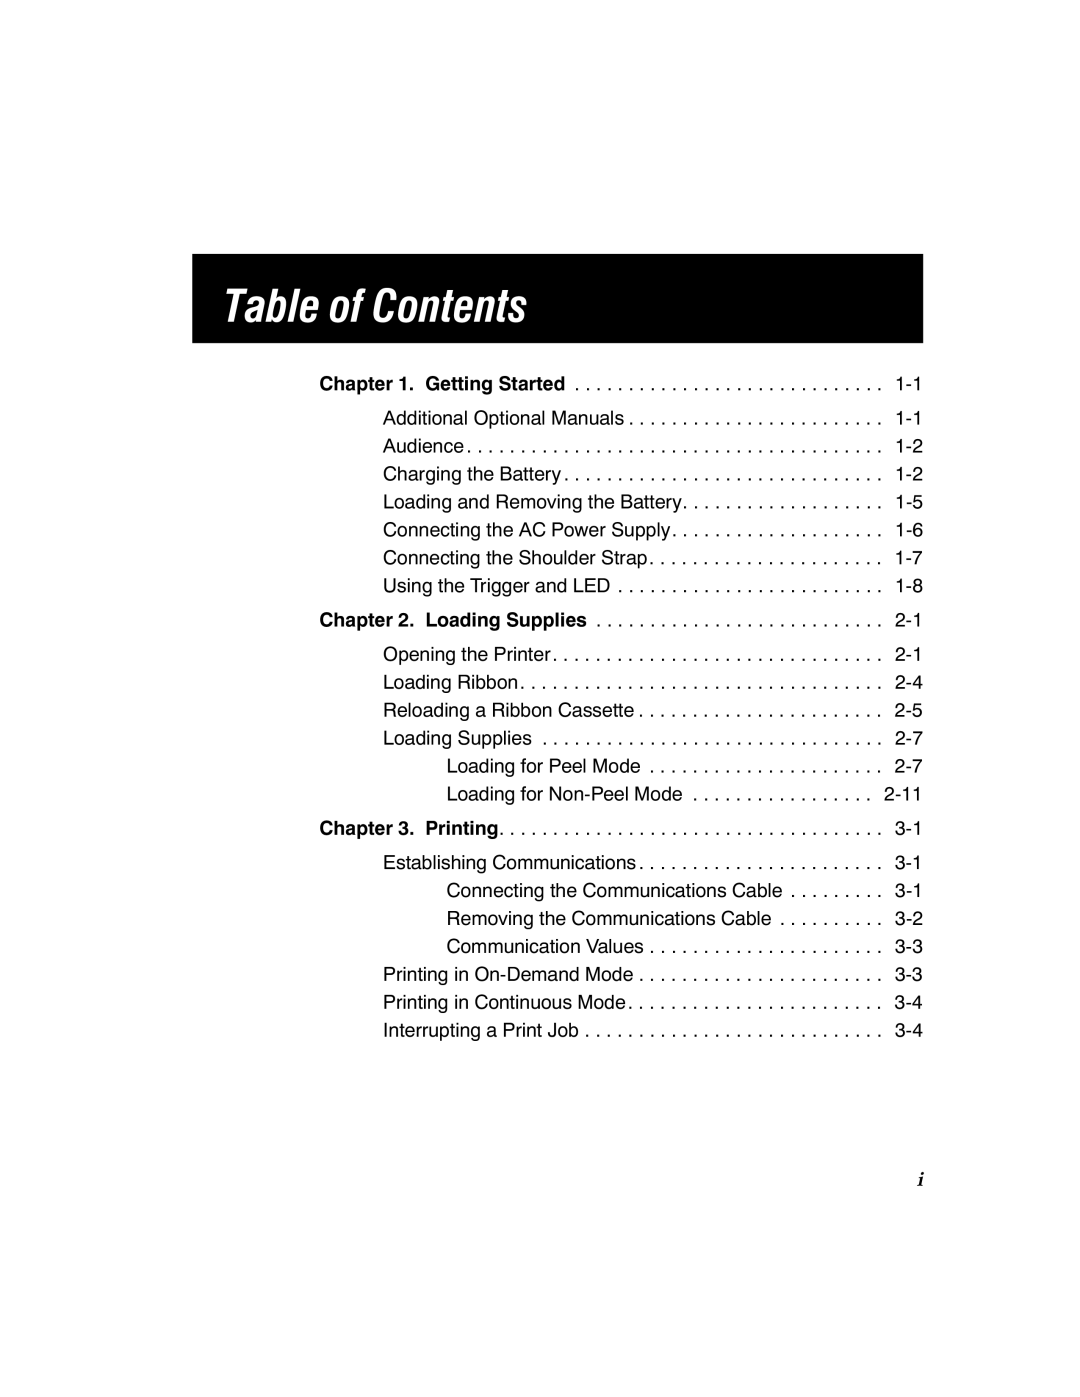 Paxar 4 manual Table of Contents 